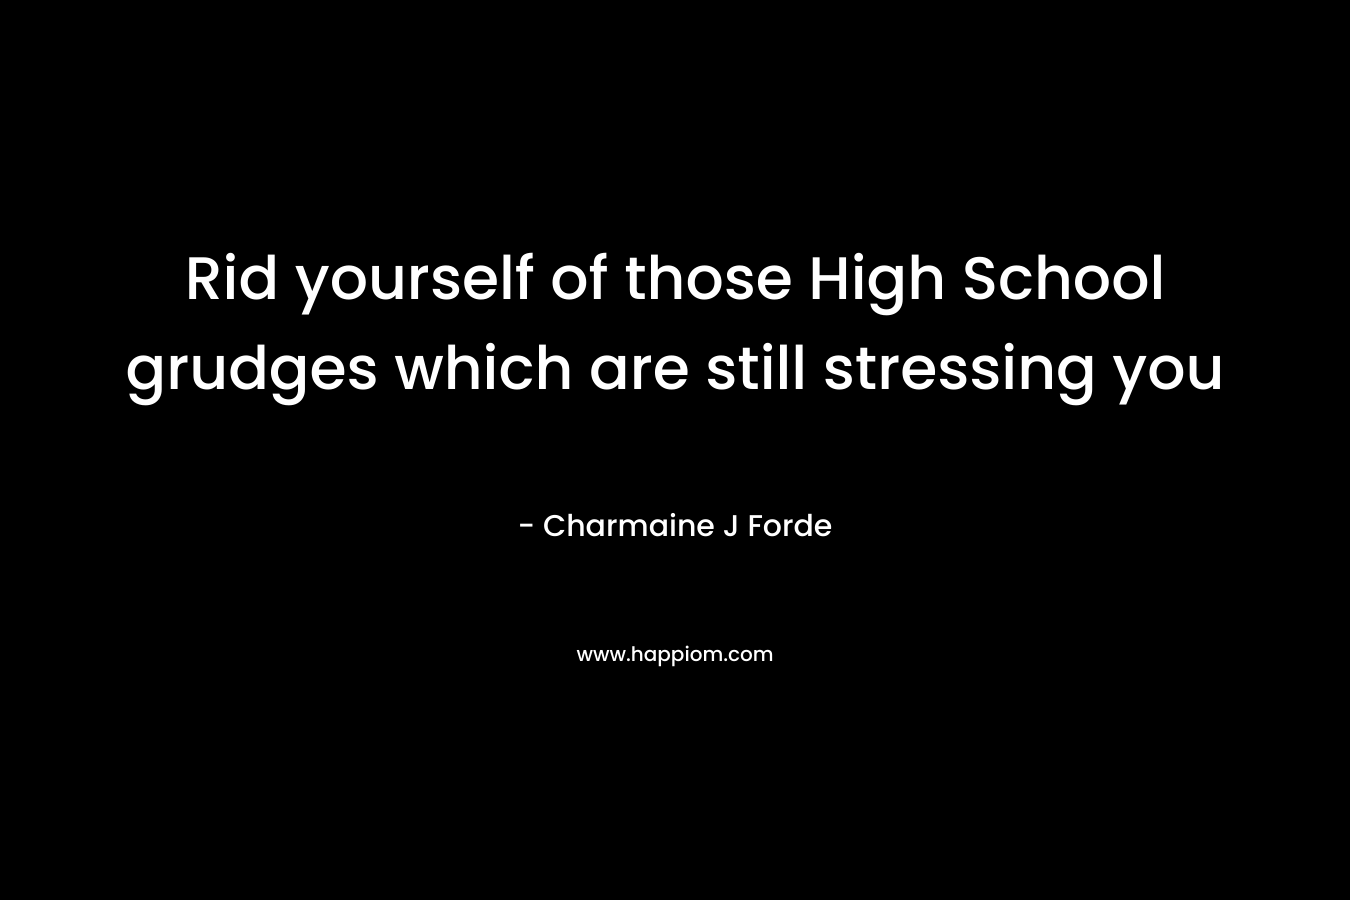 Rid yourself of those High School grudges which are still stressing you